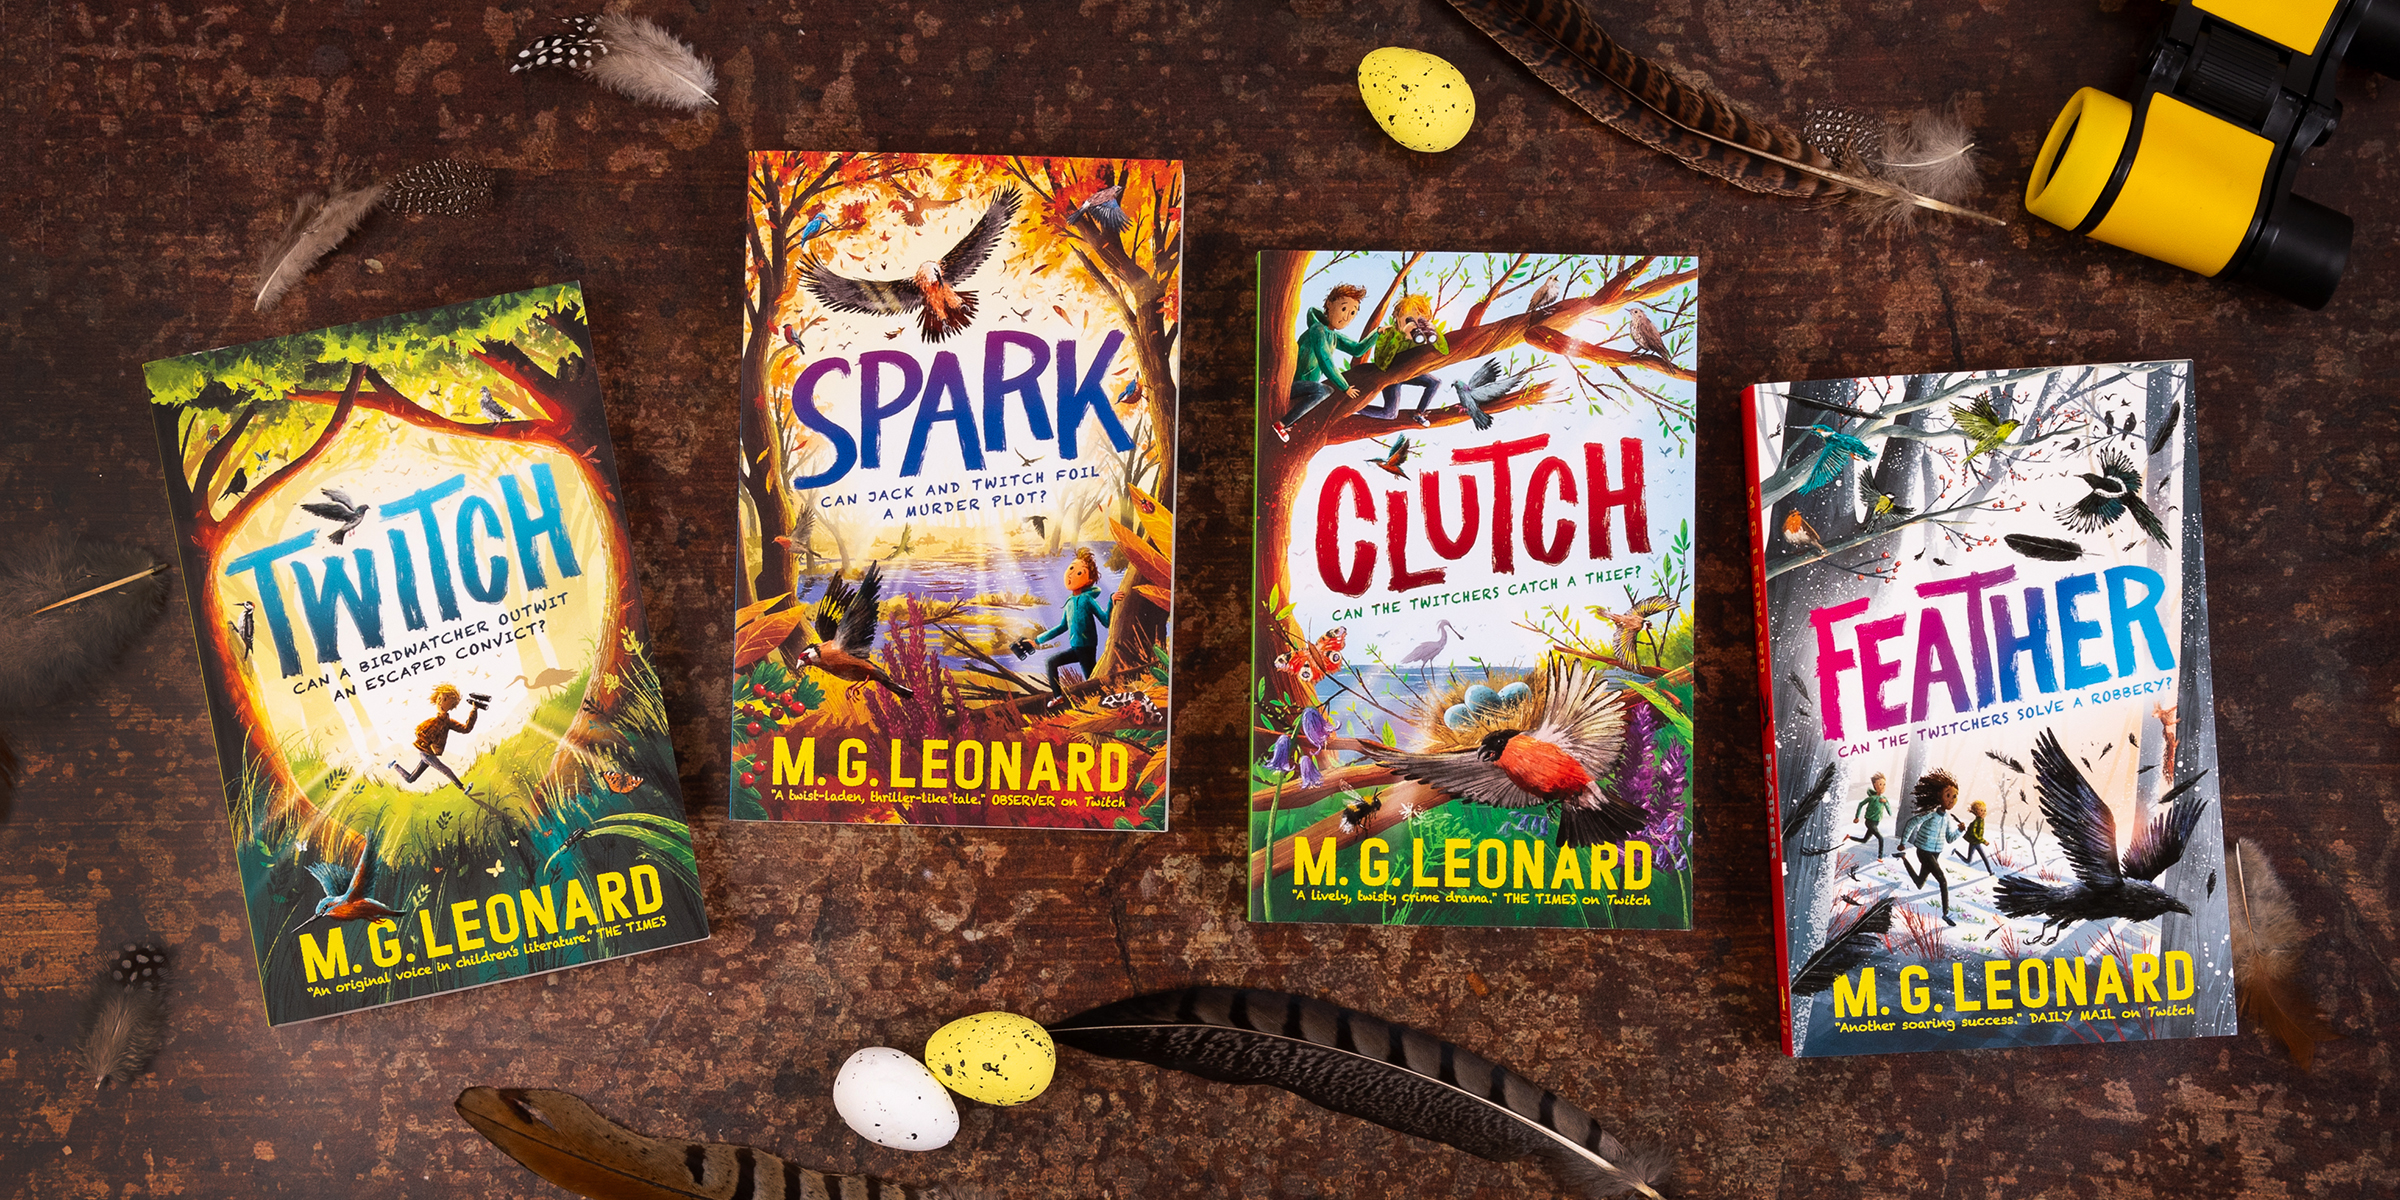 Win a set of the Twitchers series, including Feather by M. G. Leonard